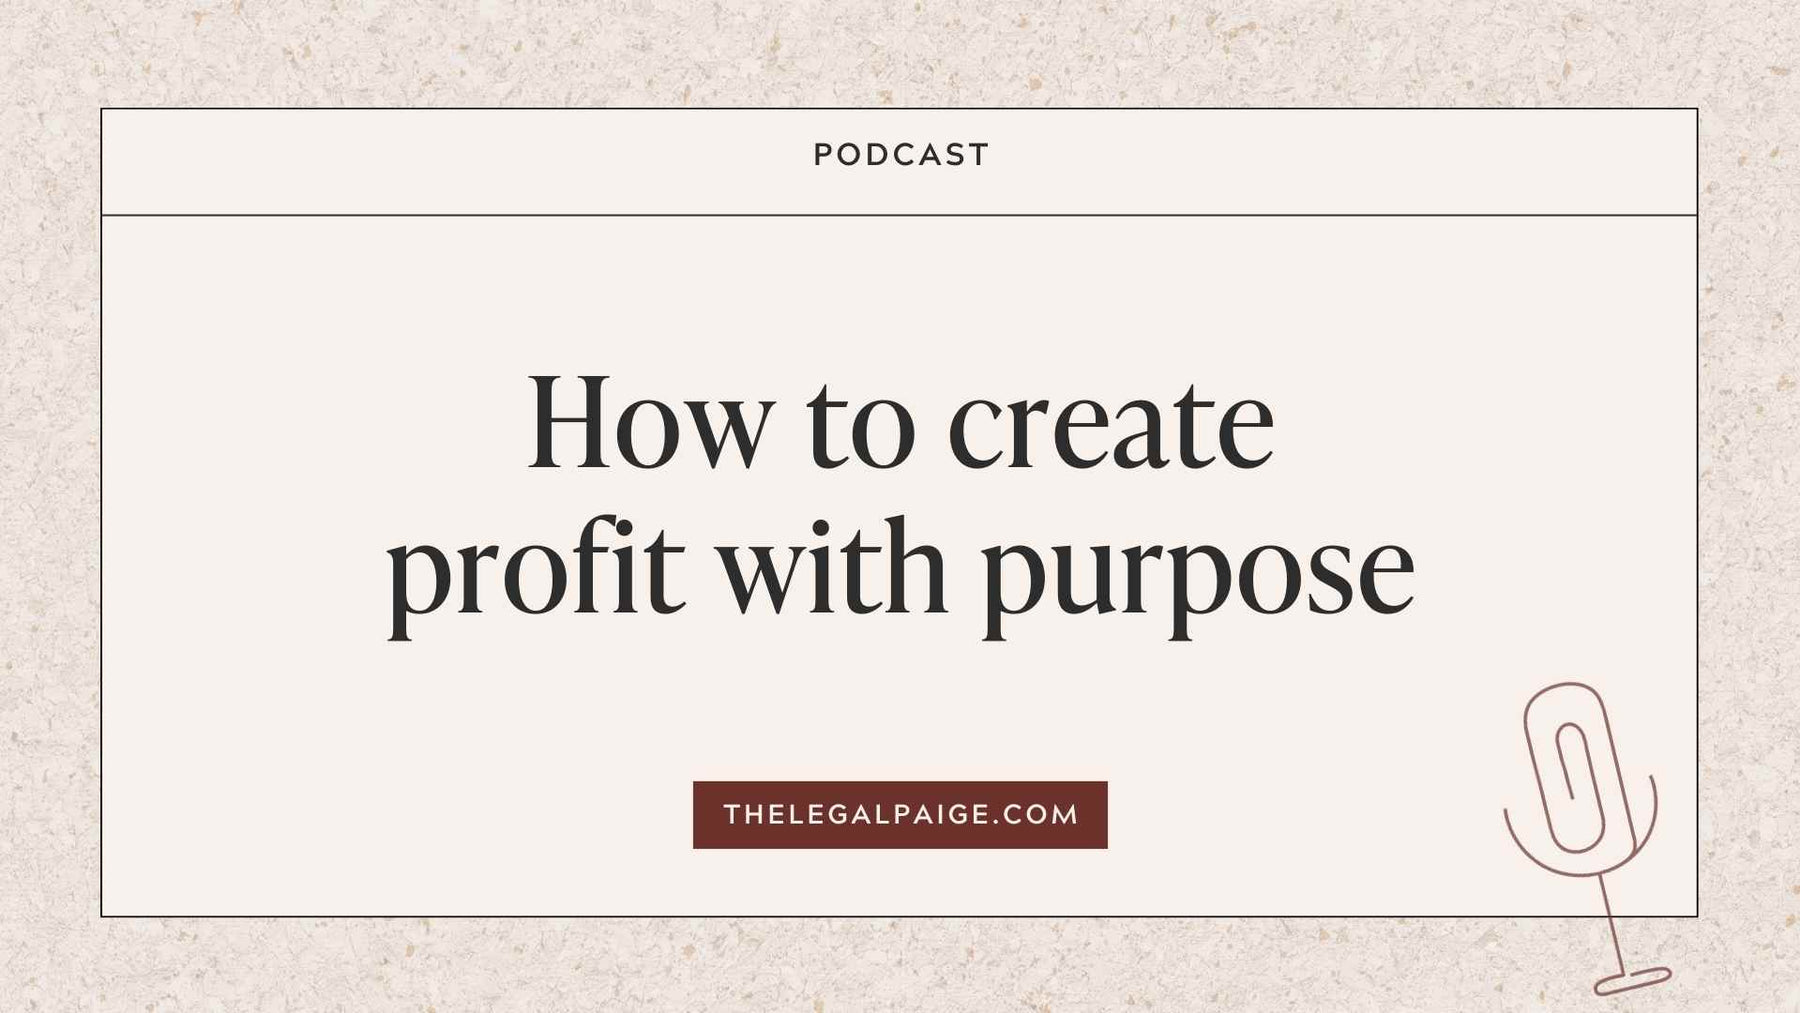 Episode 20: How to create profit with purpose